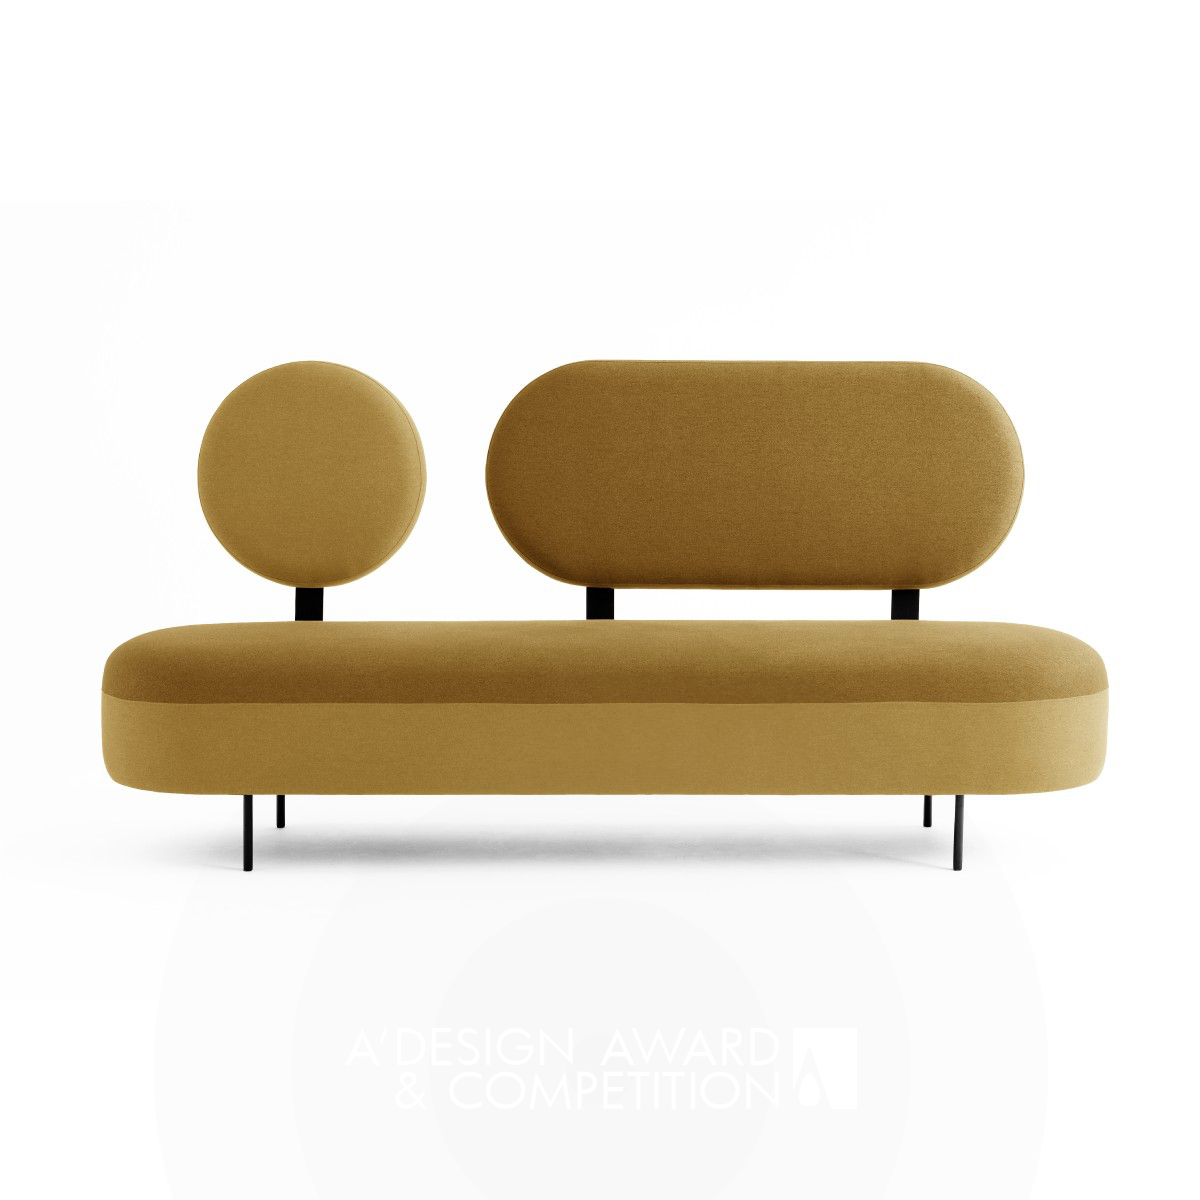 Graphic Sofa: A Fusion of Art and Functionality